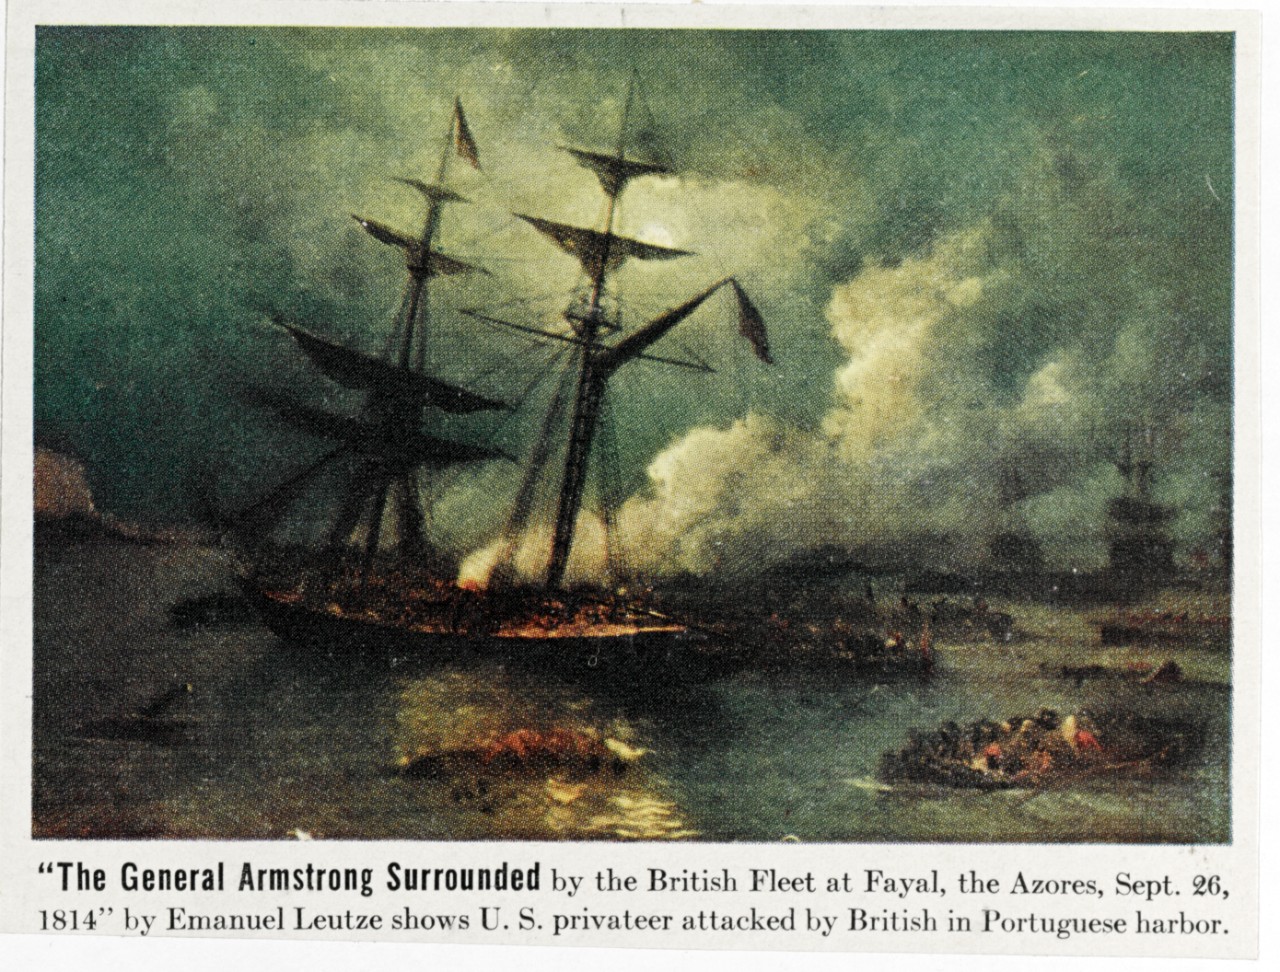 The General Armstrong surrounded by the British Fleet at Fayal, Azores, 1814